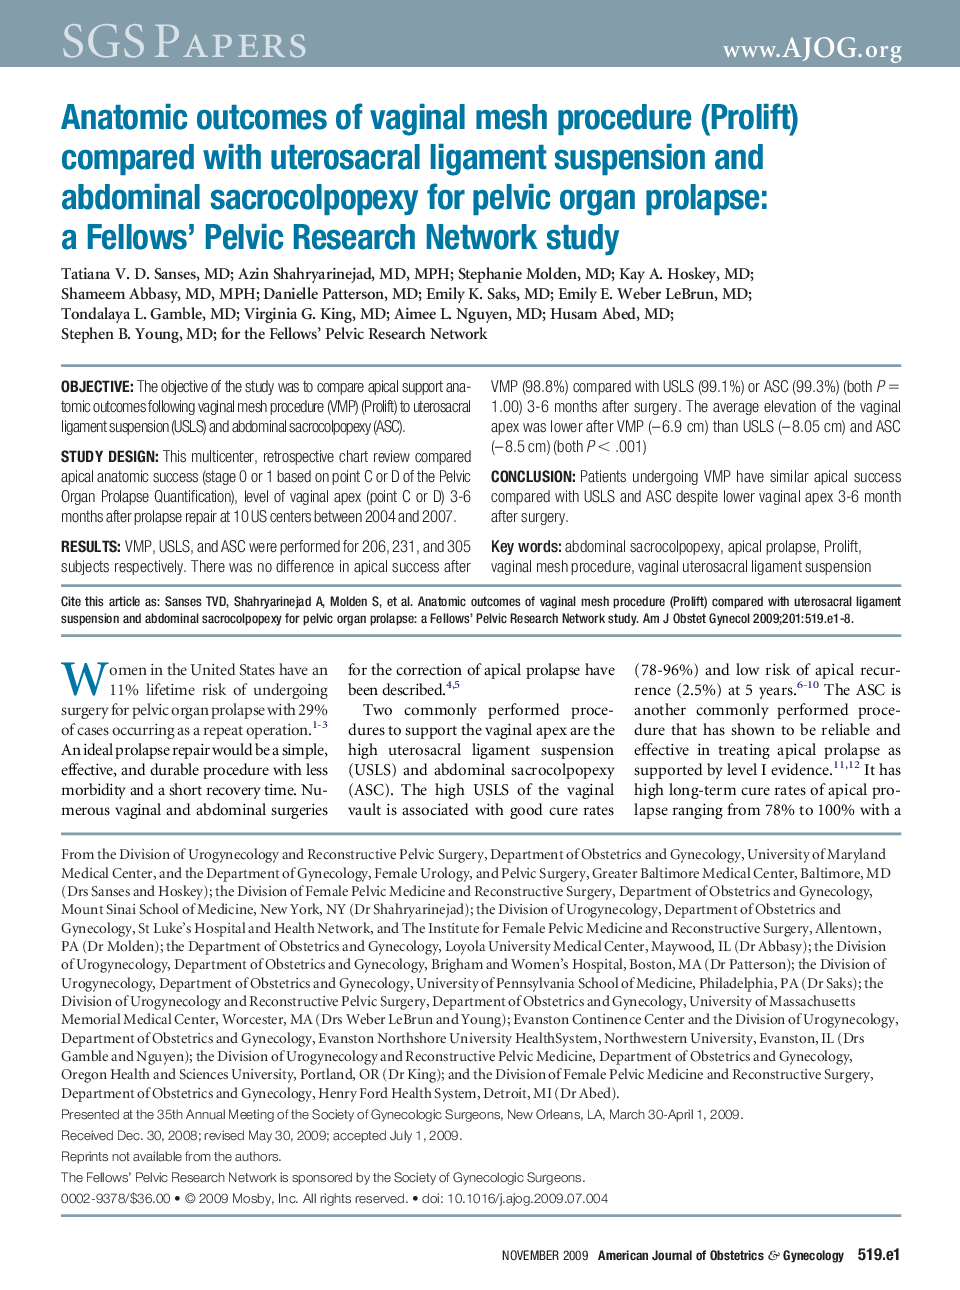 Anatomic outcomes of vaginal mesh procedure (Prolift) compared with uterosacral ligament suspension and abdominal sacrocolpopexy for pelvic organ prolapse: a Fellows' Pelvic Research Network study